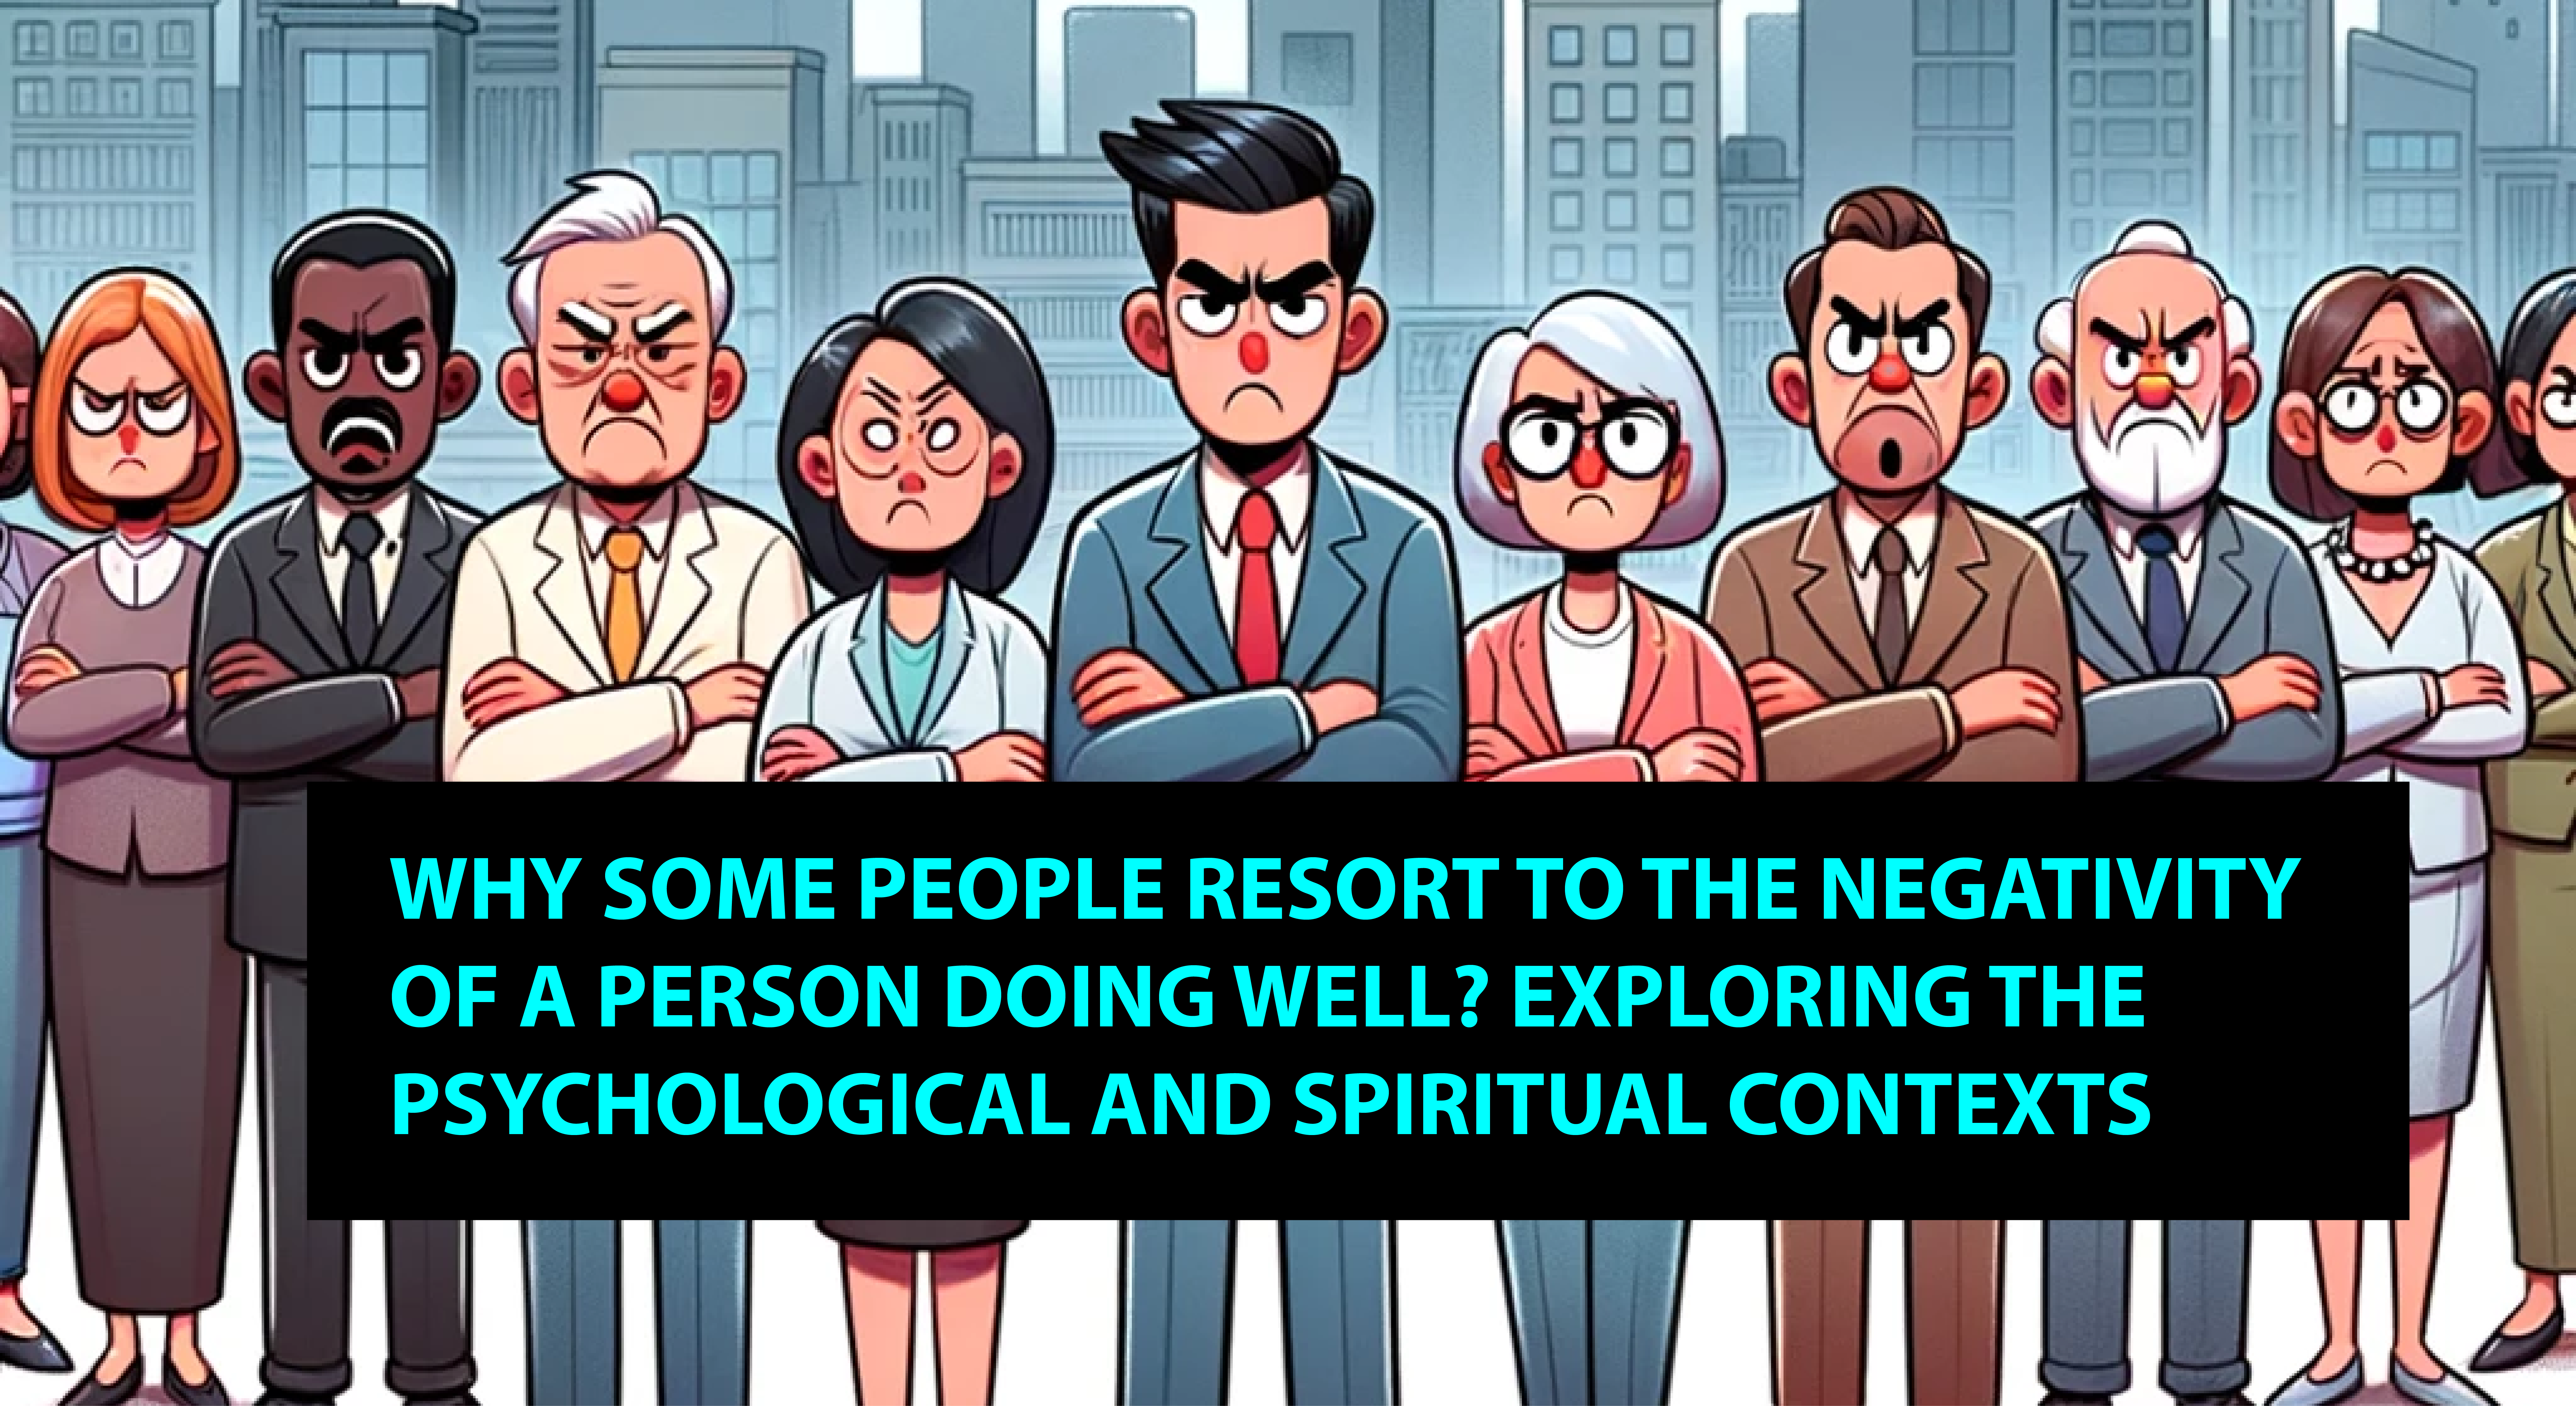 Why Some People Resort to the Negativity of a Person Doing Well? Exploring the Psychological and Spiritual Contexts